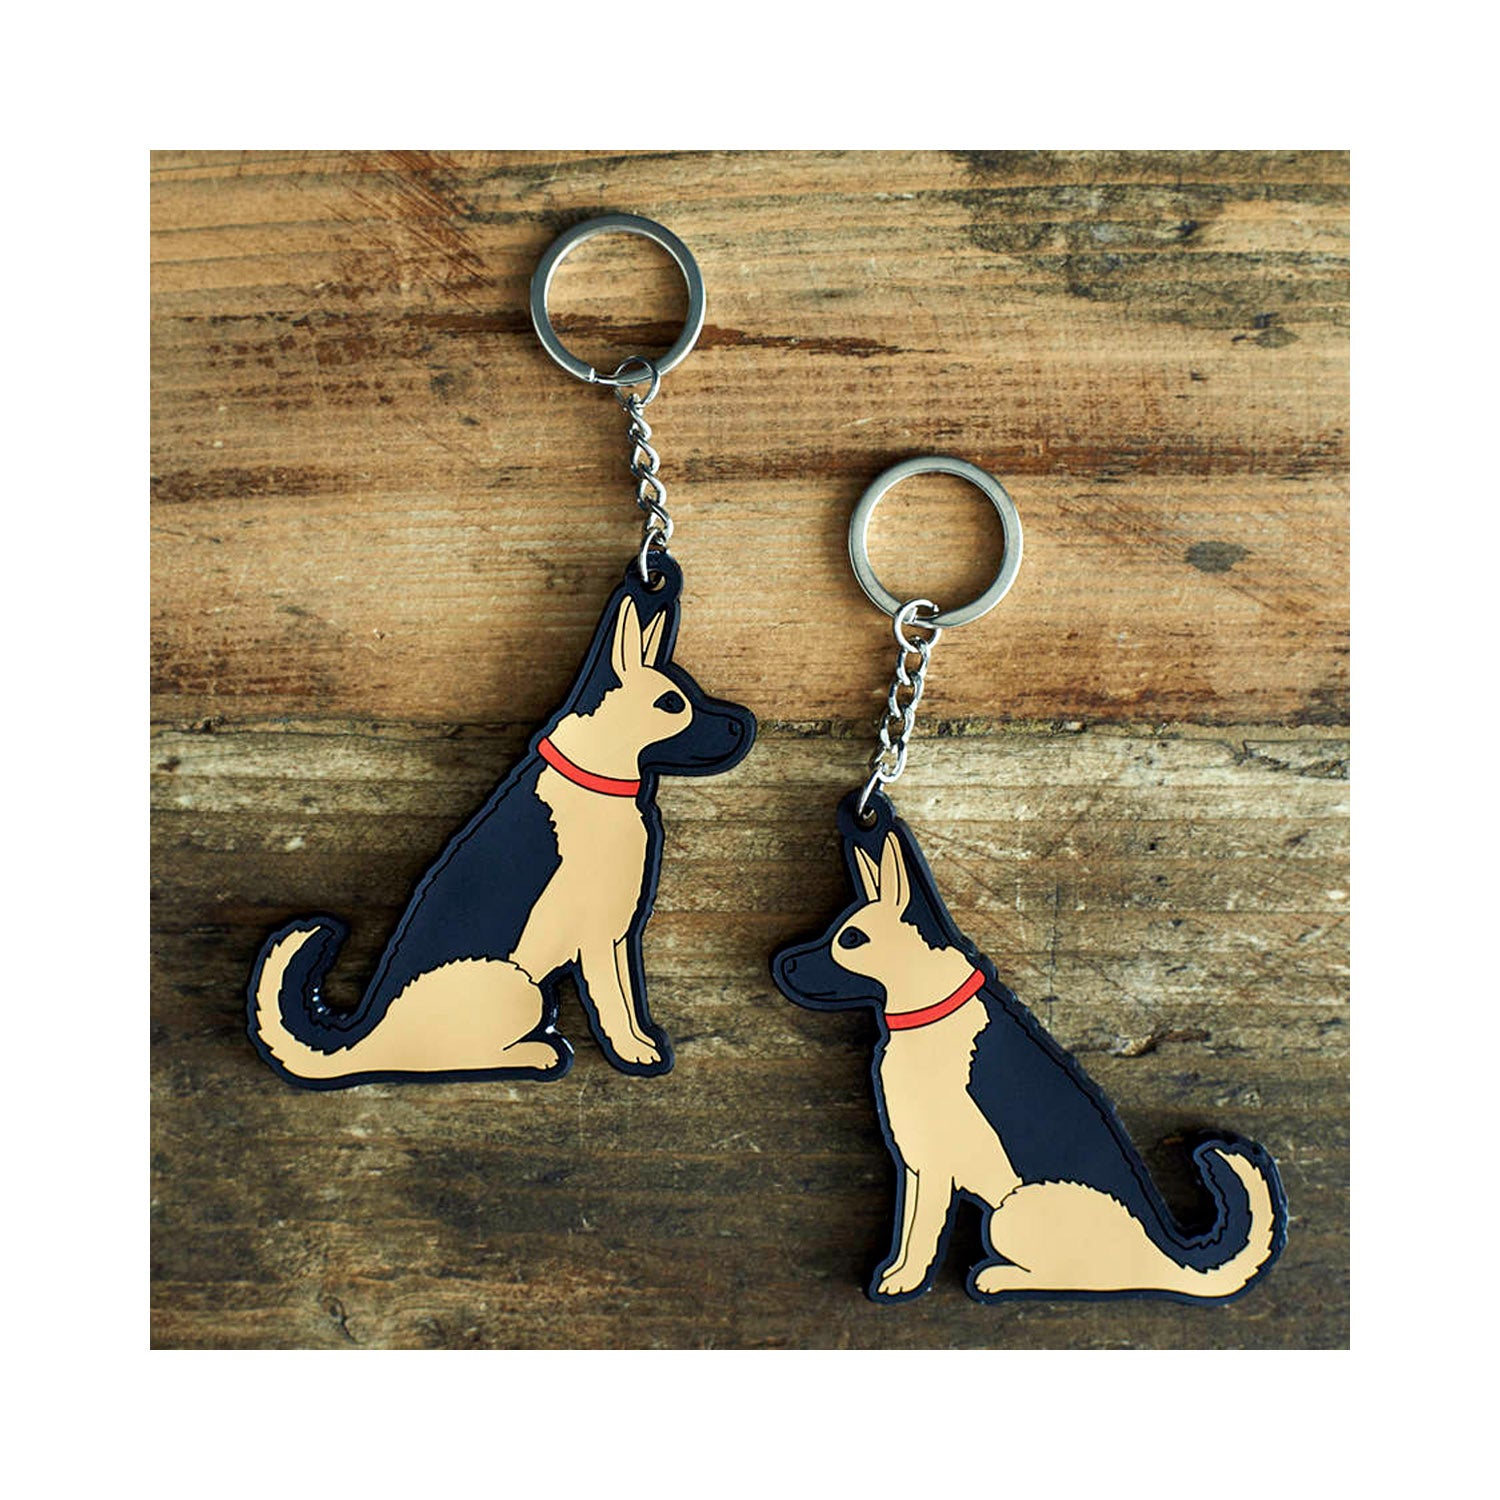 Dog Lover Gifts available at Dog Krazy Gifts - Sebastian The German Shepherd Keyring - part of the Sweet William range available from Dog Krazy Gifts